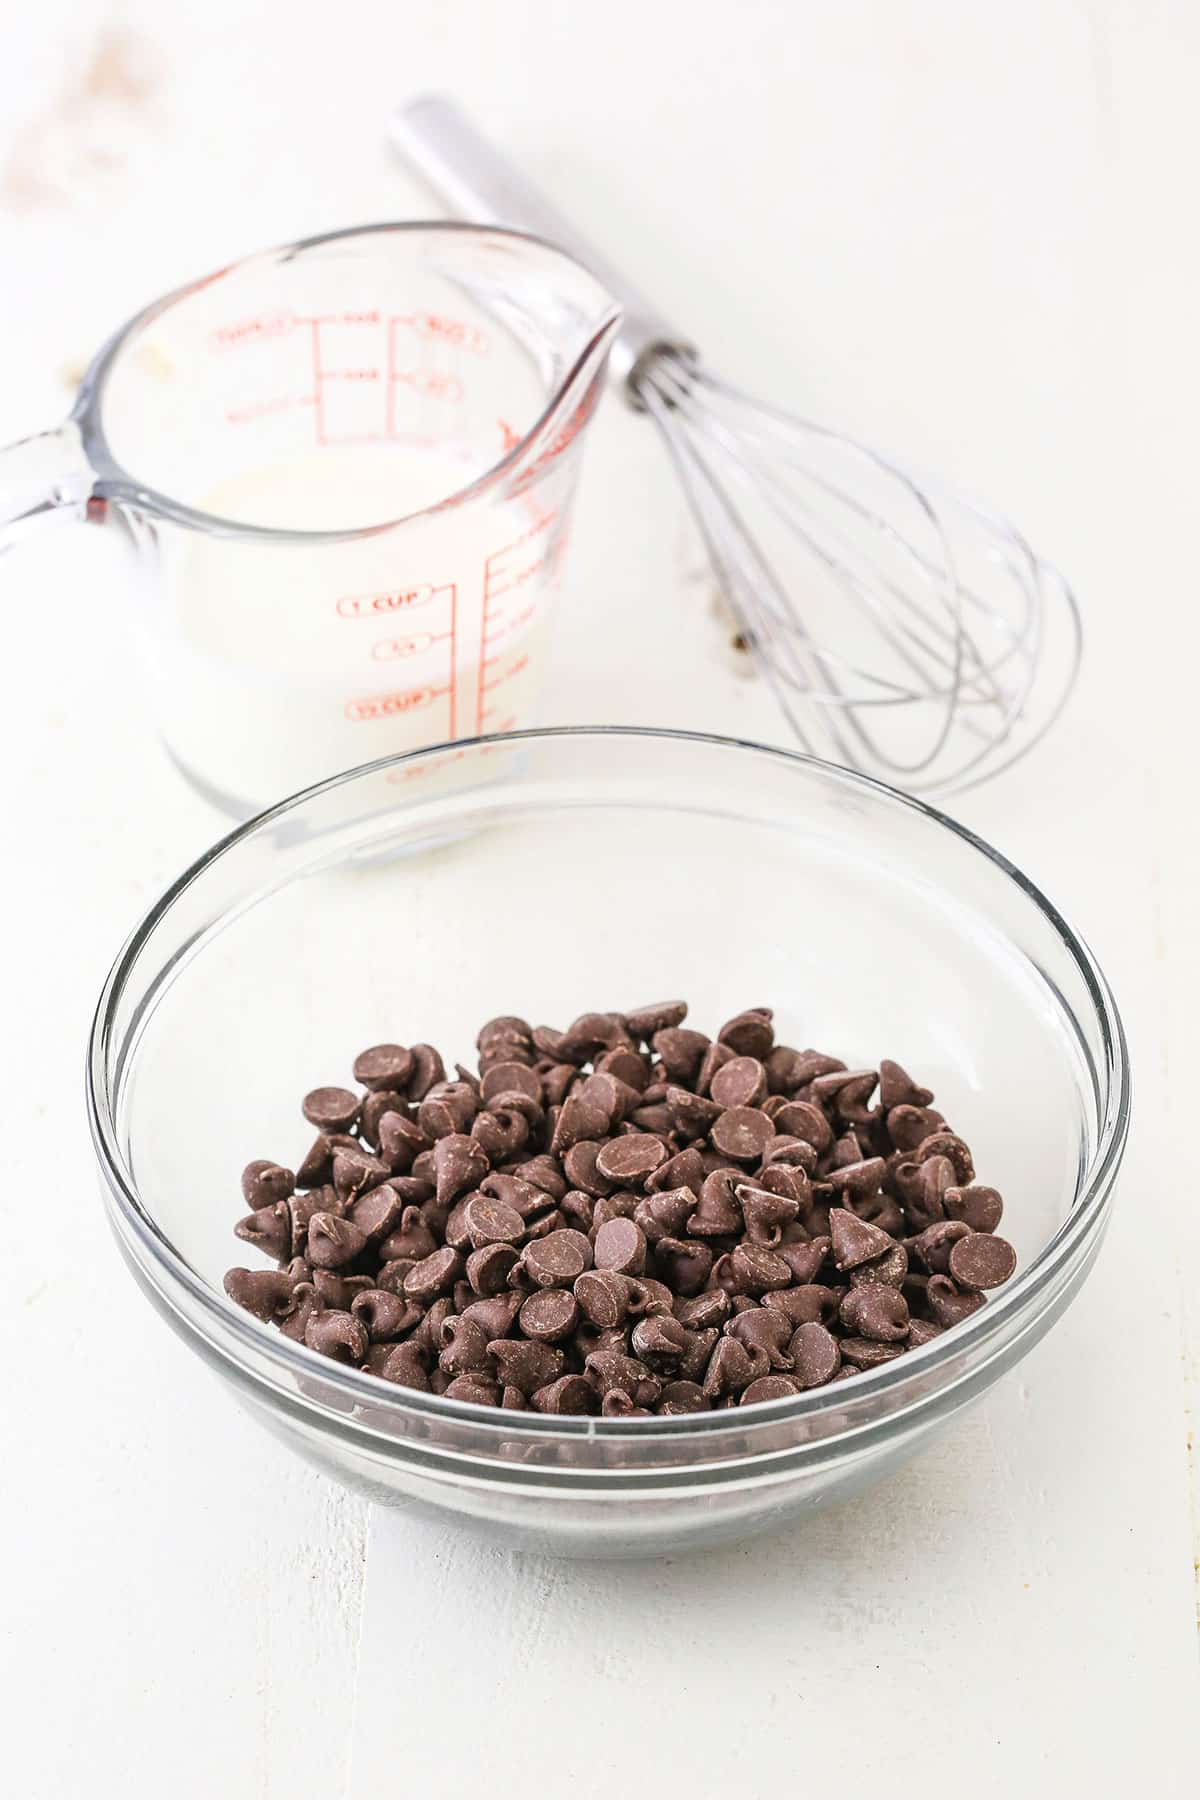 Chocolate chips in a clear glass bowl and heavy whipping cream in a clear glass measuring cup next to a whisk